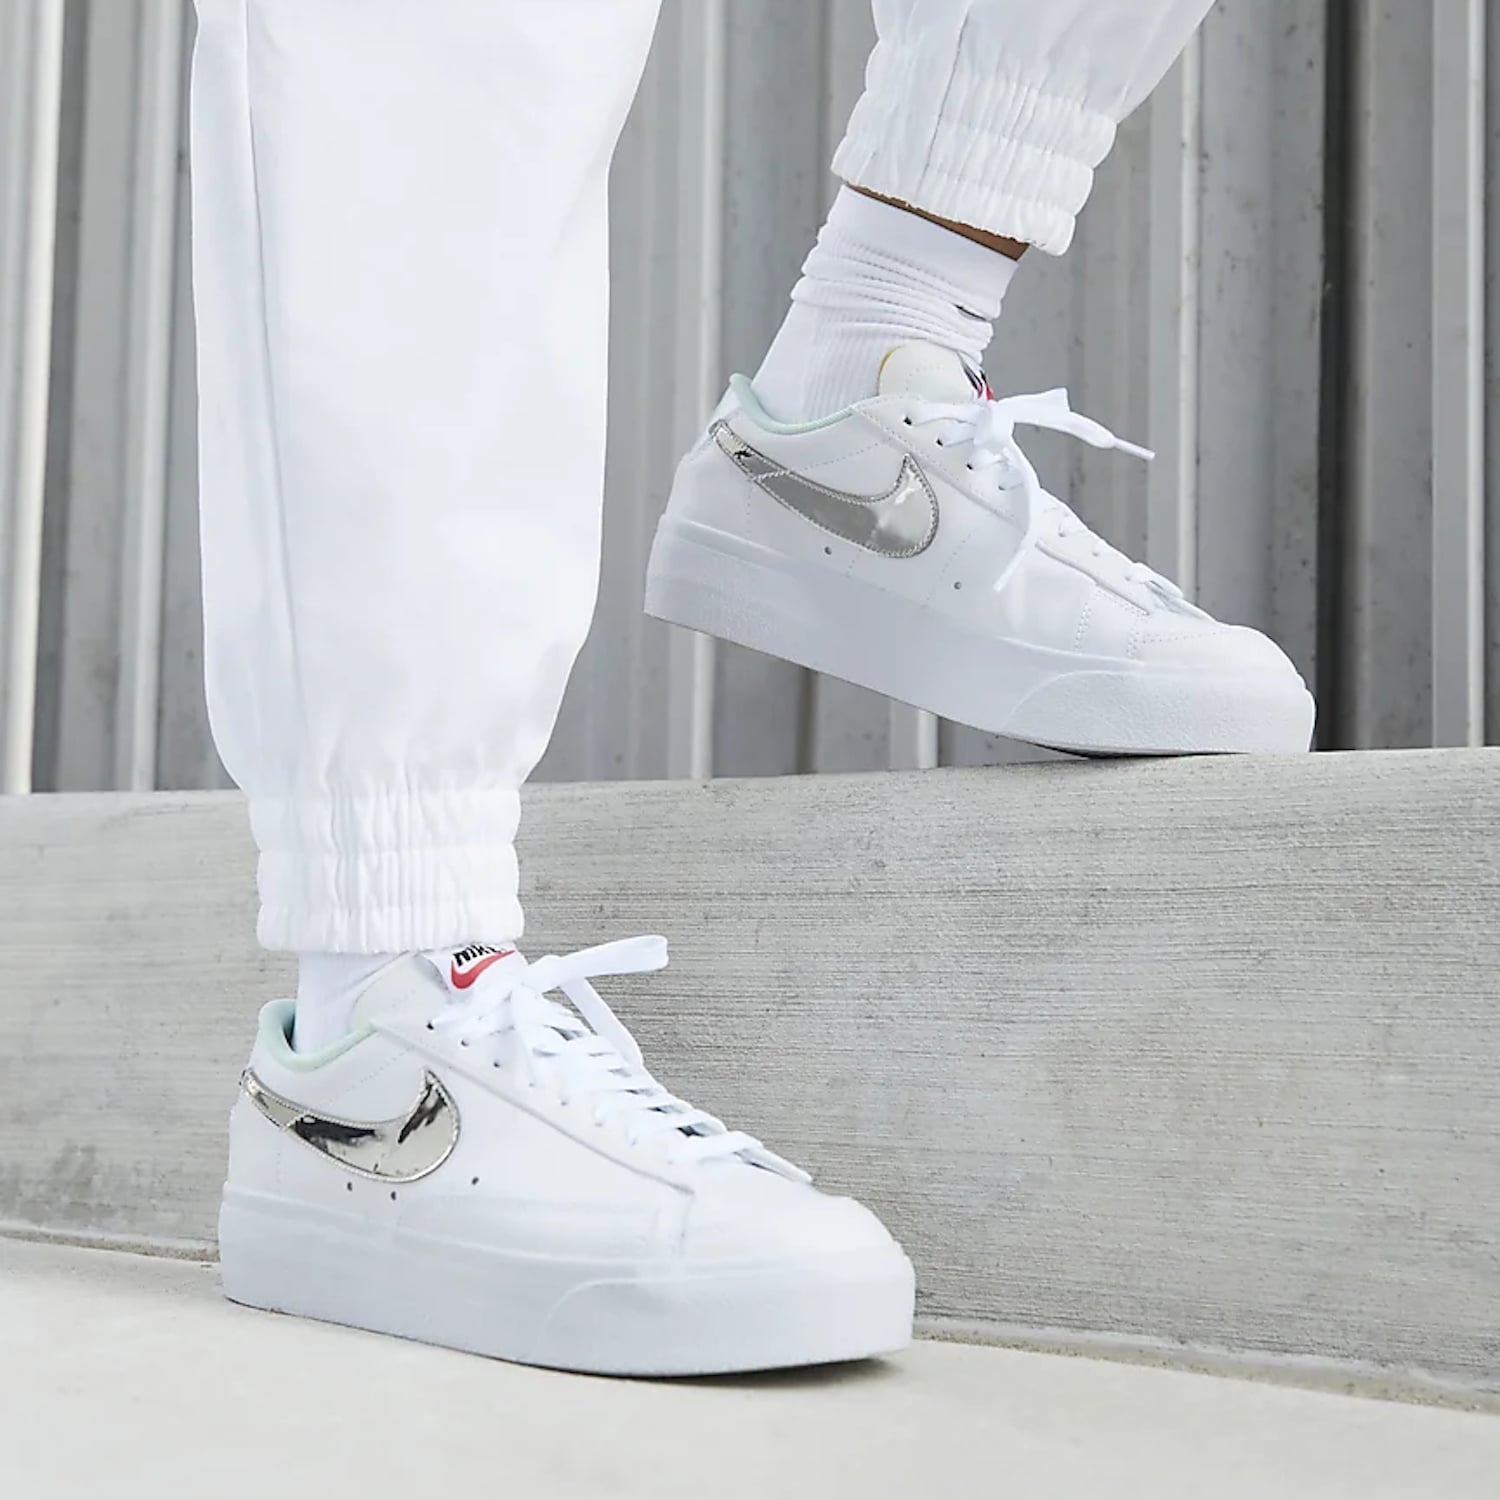 The Stylish Women's Sneakers For Winter 2022 | Fashion